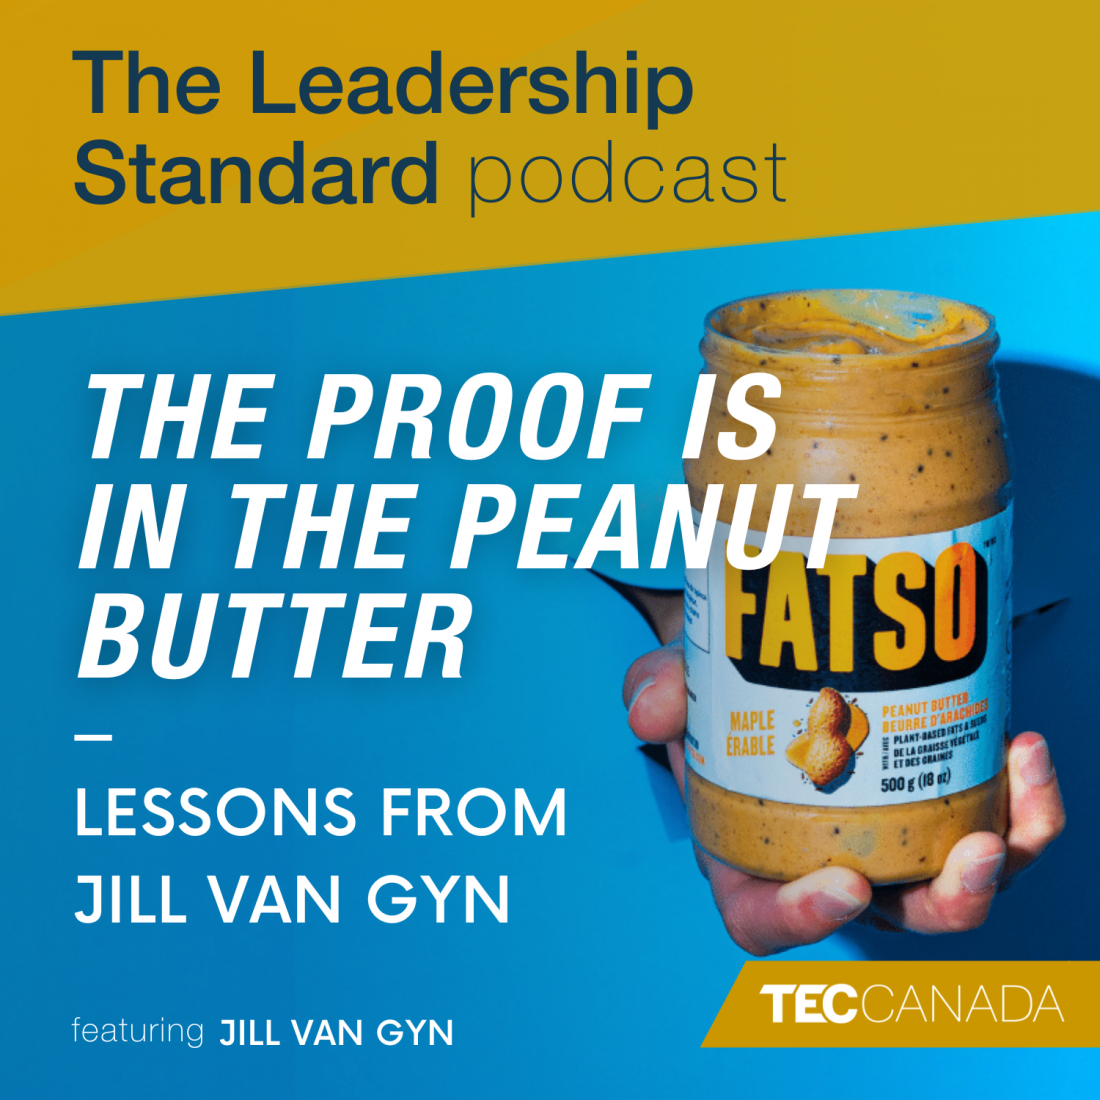 Title Image - "The Proof is in the Peanut Butter - Lessons from Jill Van Gyn"